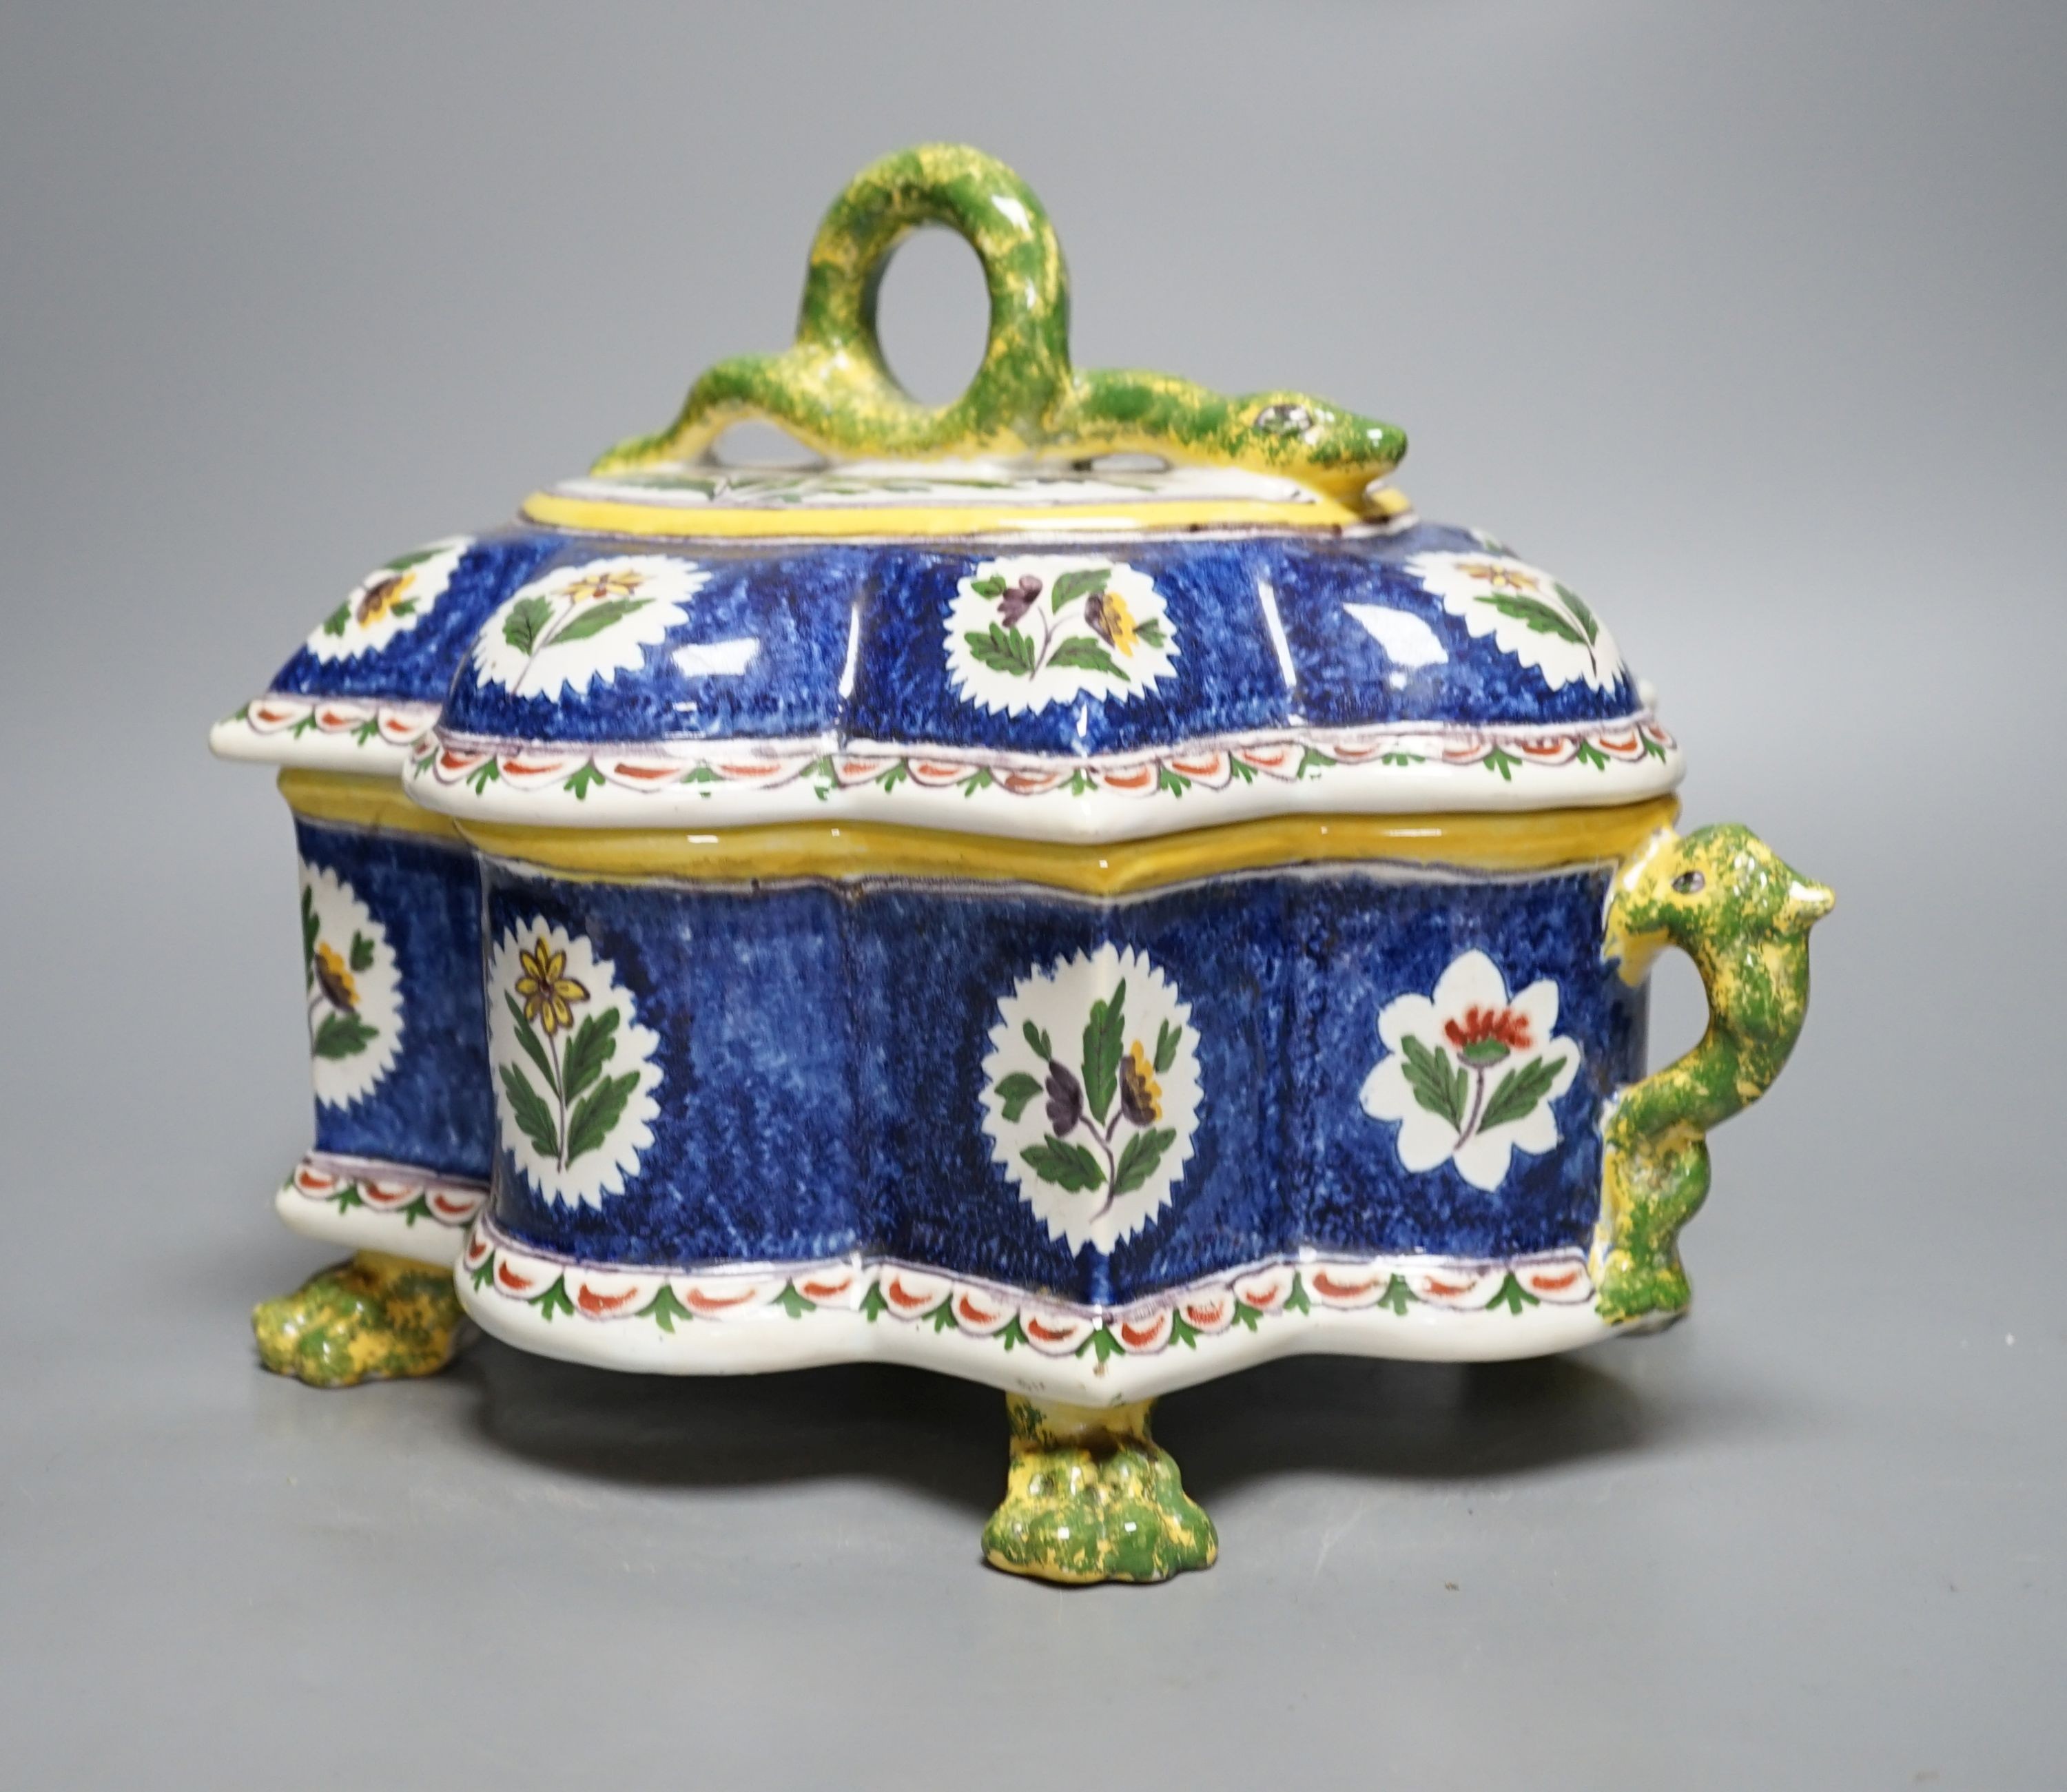 A Belgian Faience casket with ‘snake’ handles 30cm